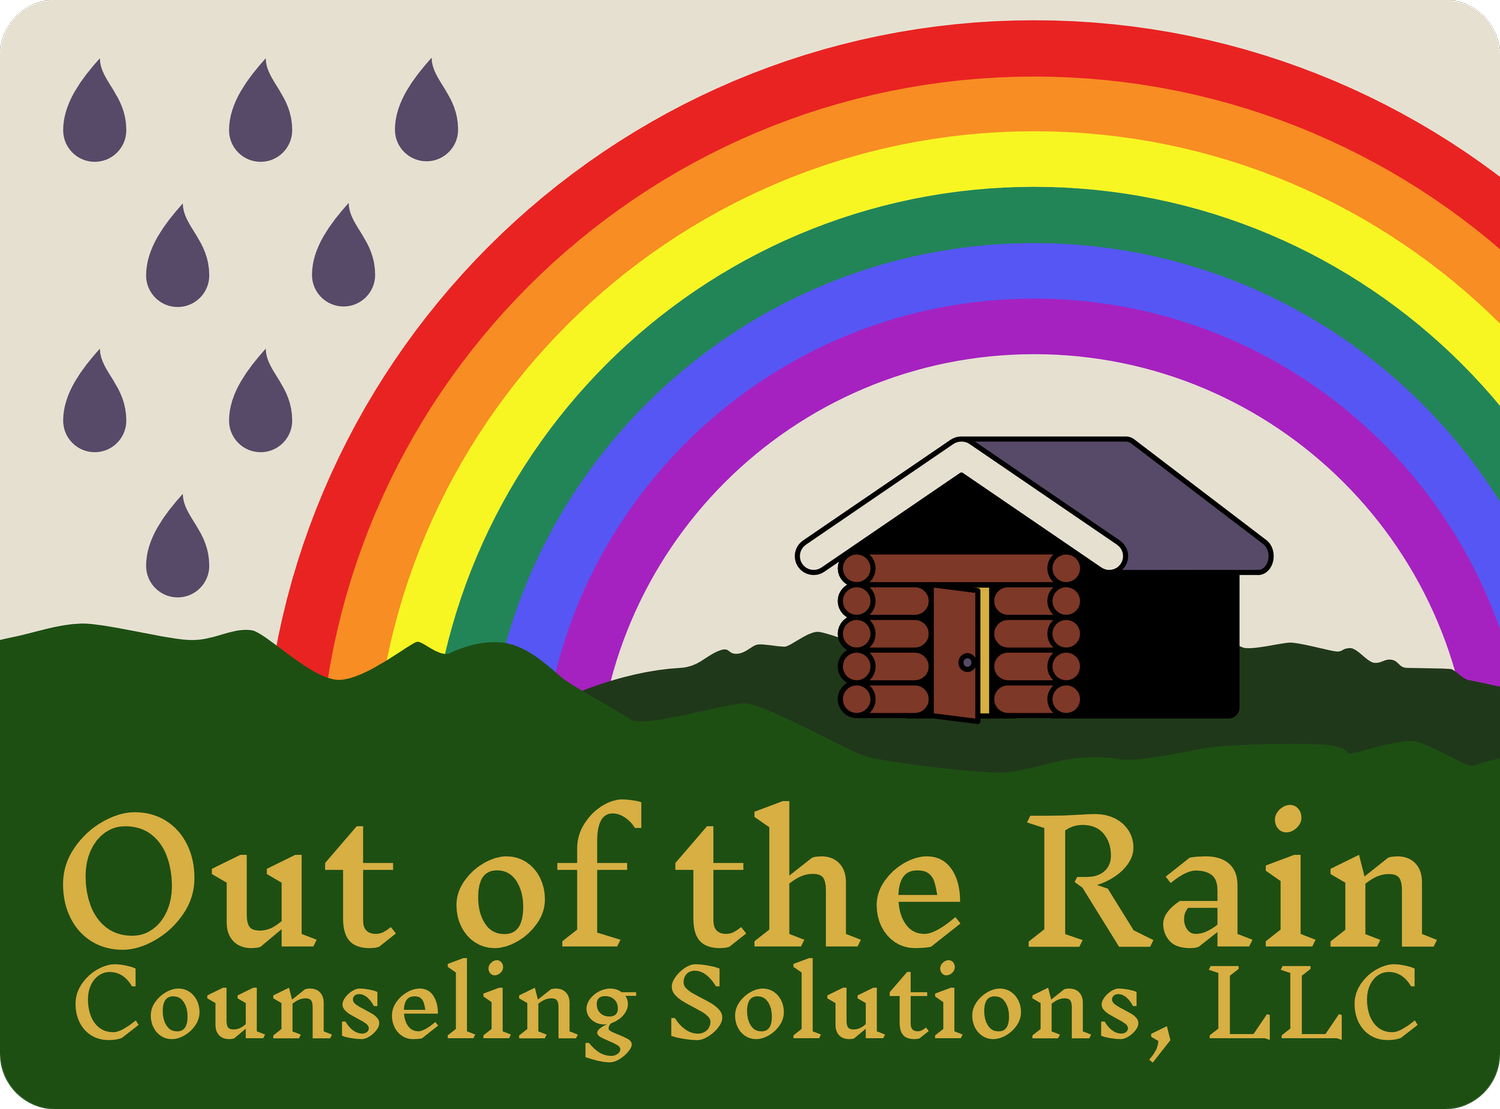 Out of the Rain Counseling Solutions, LLC